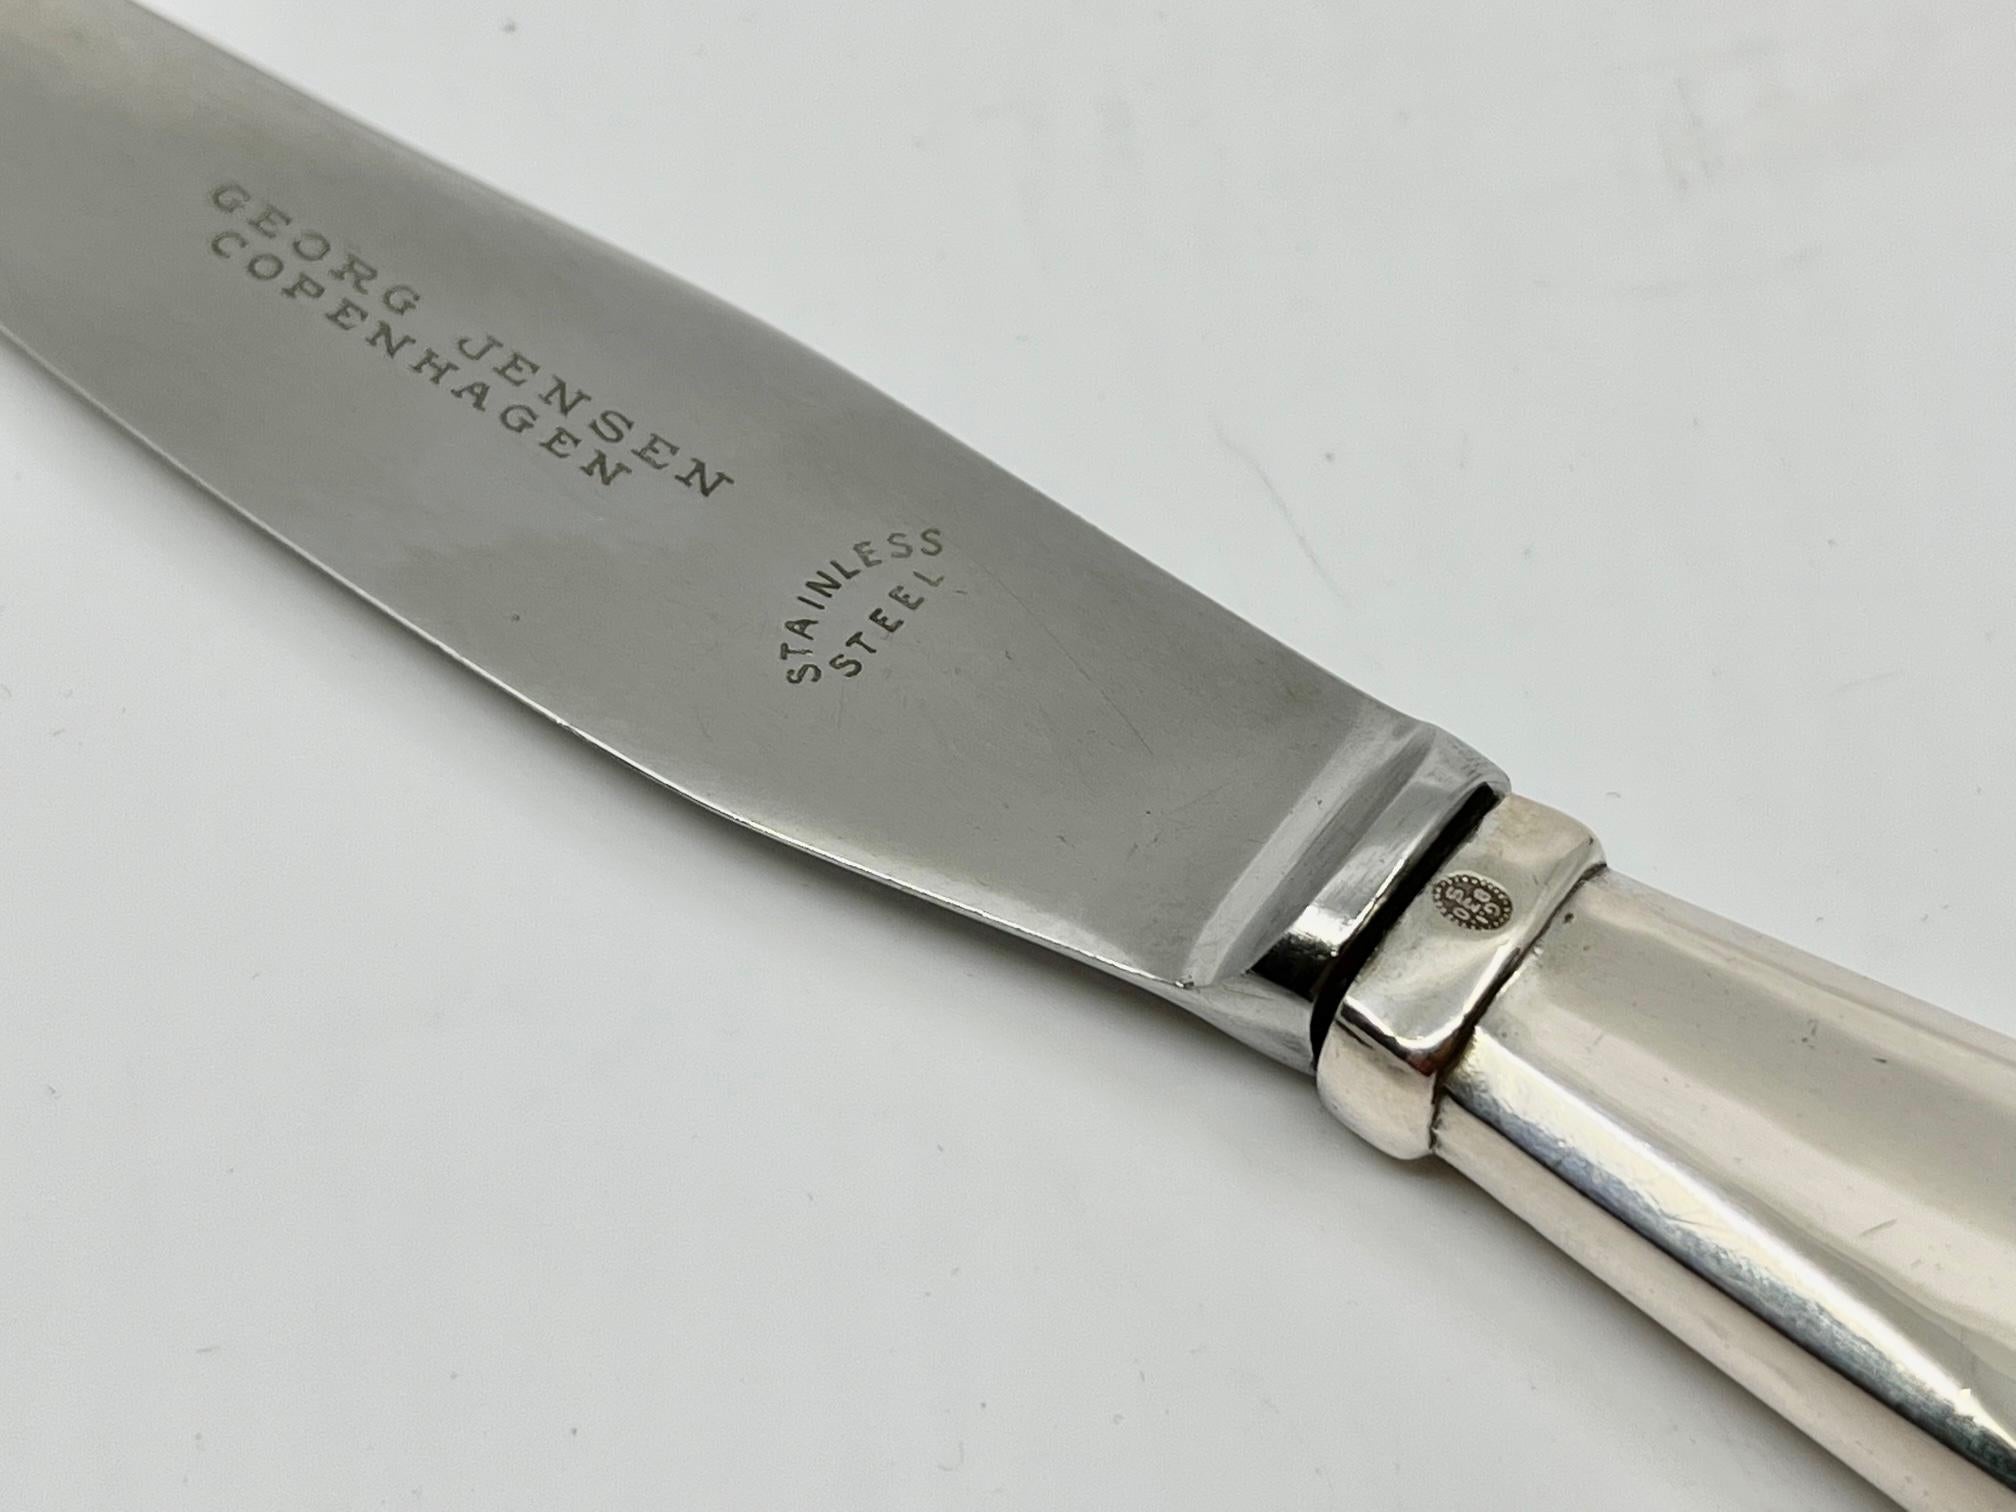 Vintage Georg Jensen luncheon knife with sterling silver handle and stainless steel blade, item #023 in the Viking Pattern, design #6 by Georg Jensen from 1927.

Additional information:
Material: Sterling silver, stainless steel
Styles: Art